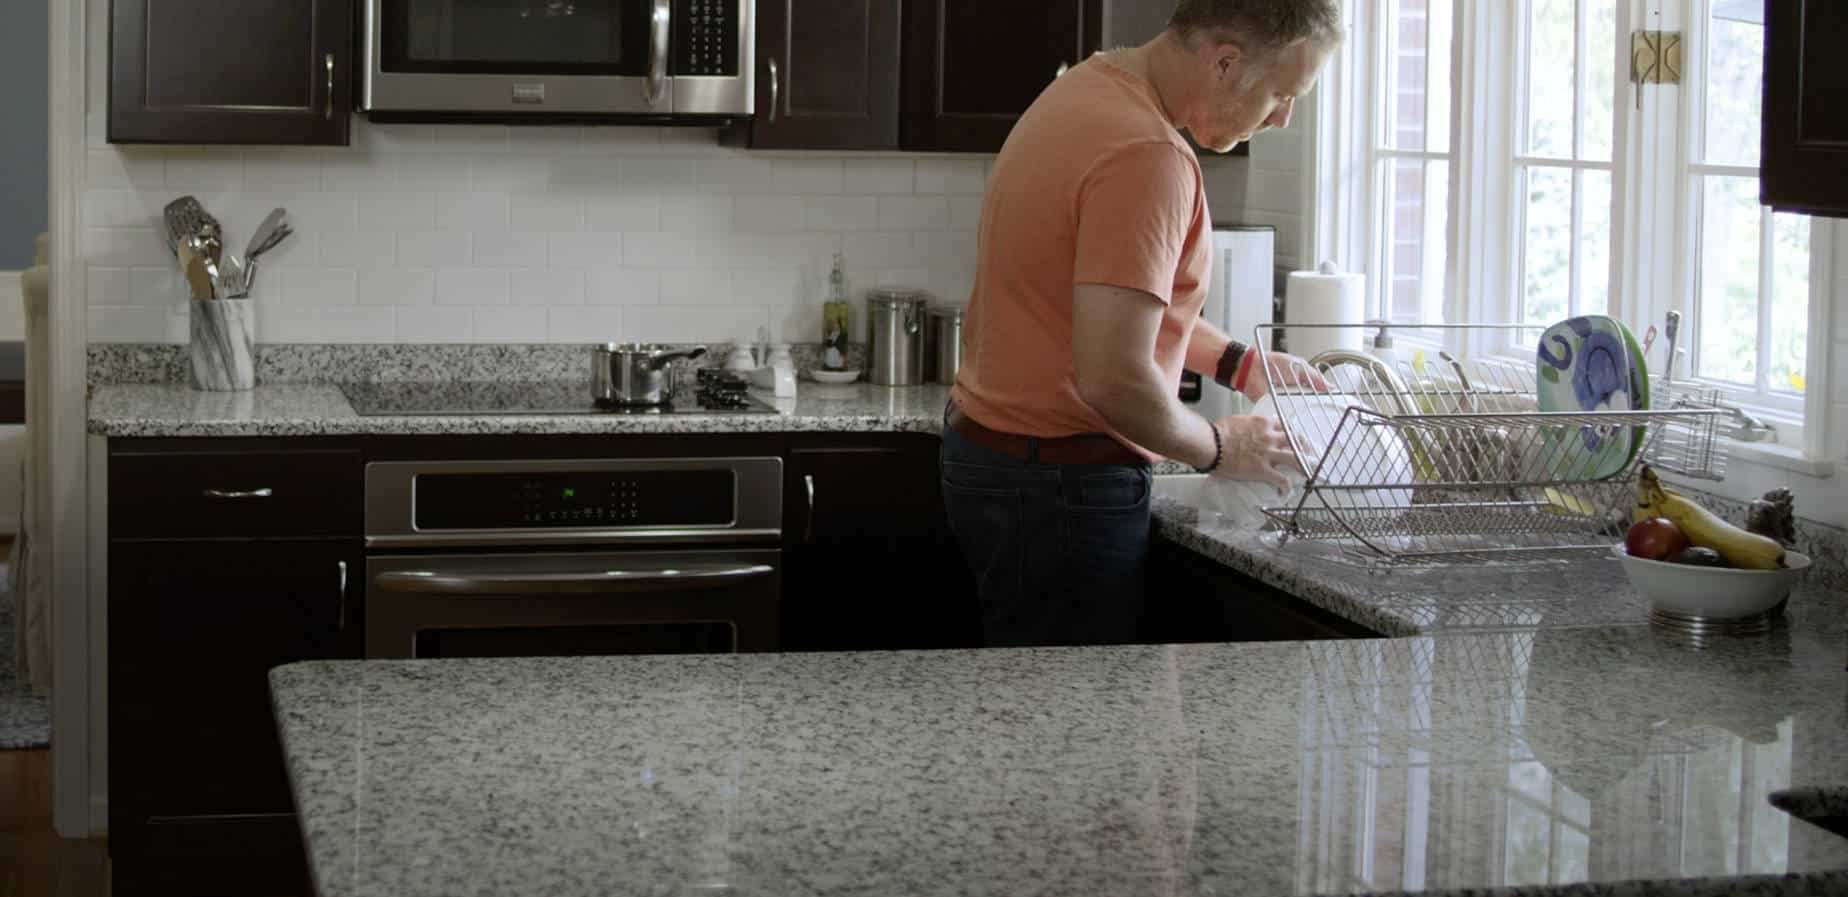 Man doing dishes in remodeled kitchen